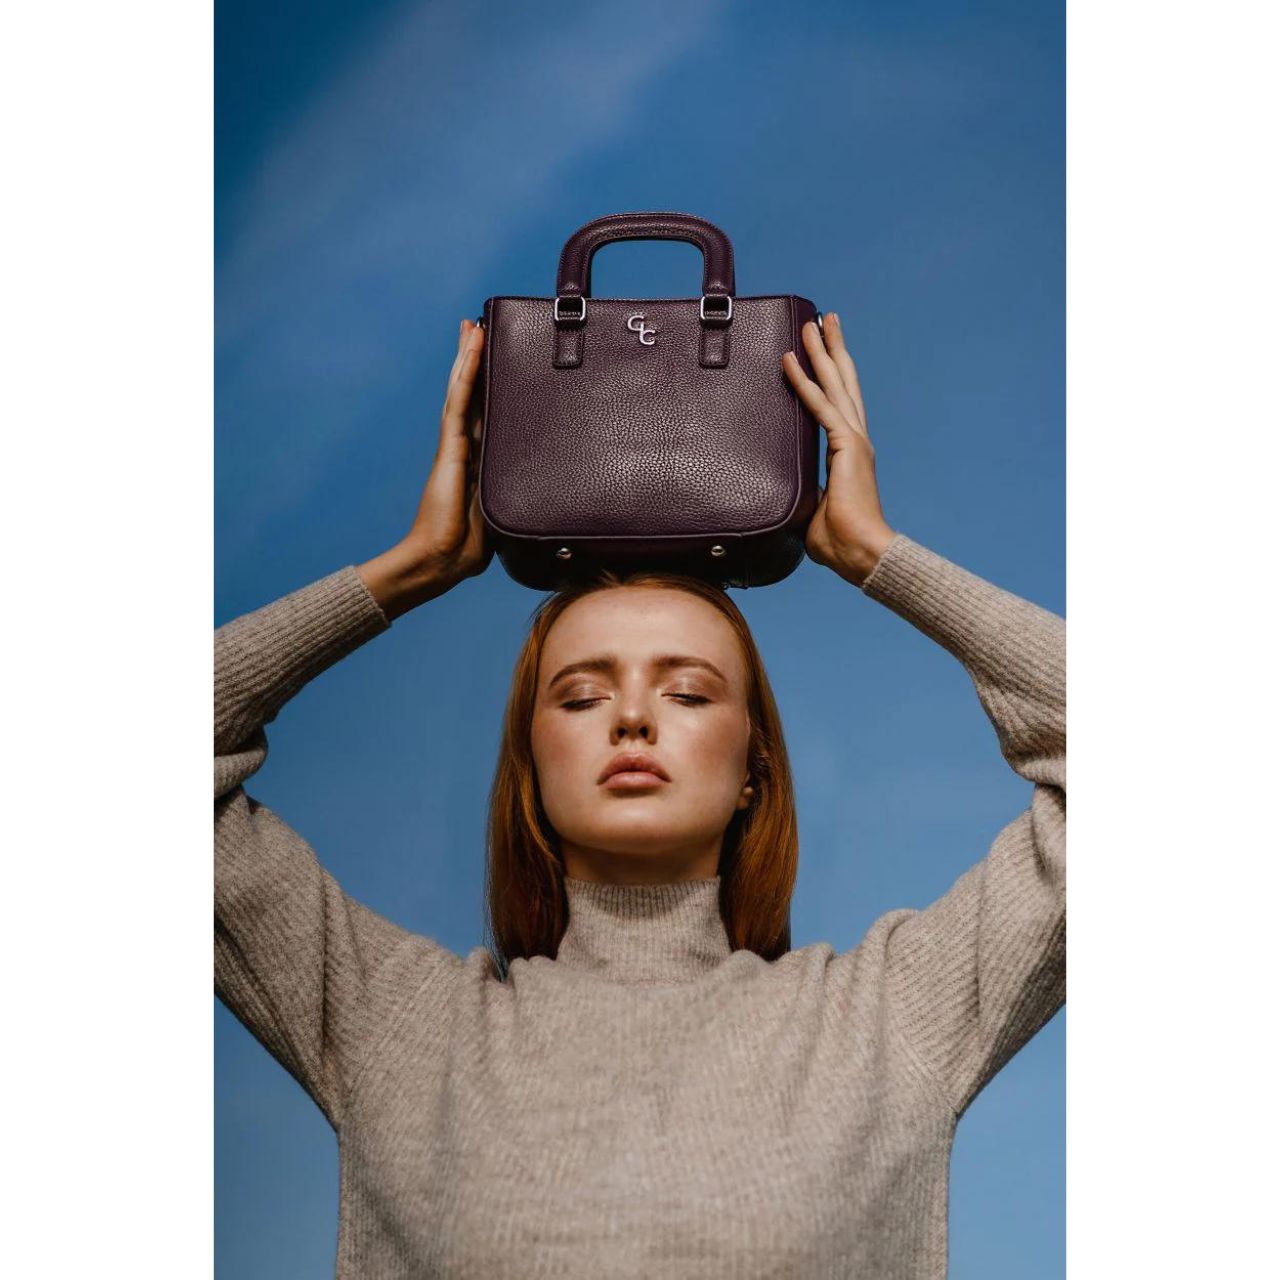 Galway Crystal Shoulder Bag - Mulberry Complete your look with our standout Galway Crystal Mulberry Shoulder bag. This stunning bag has top handles for carrying in your hand or it can be worn cross body with the detachable leather strap, instantly taking you from day to night.